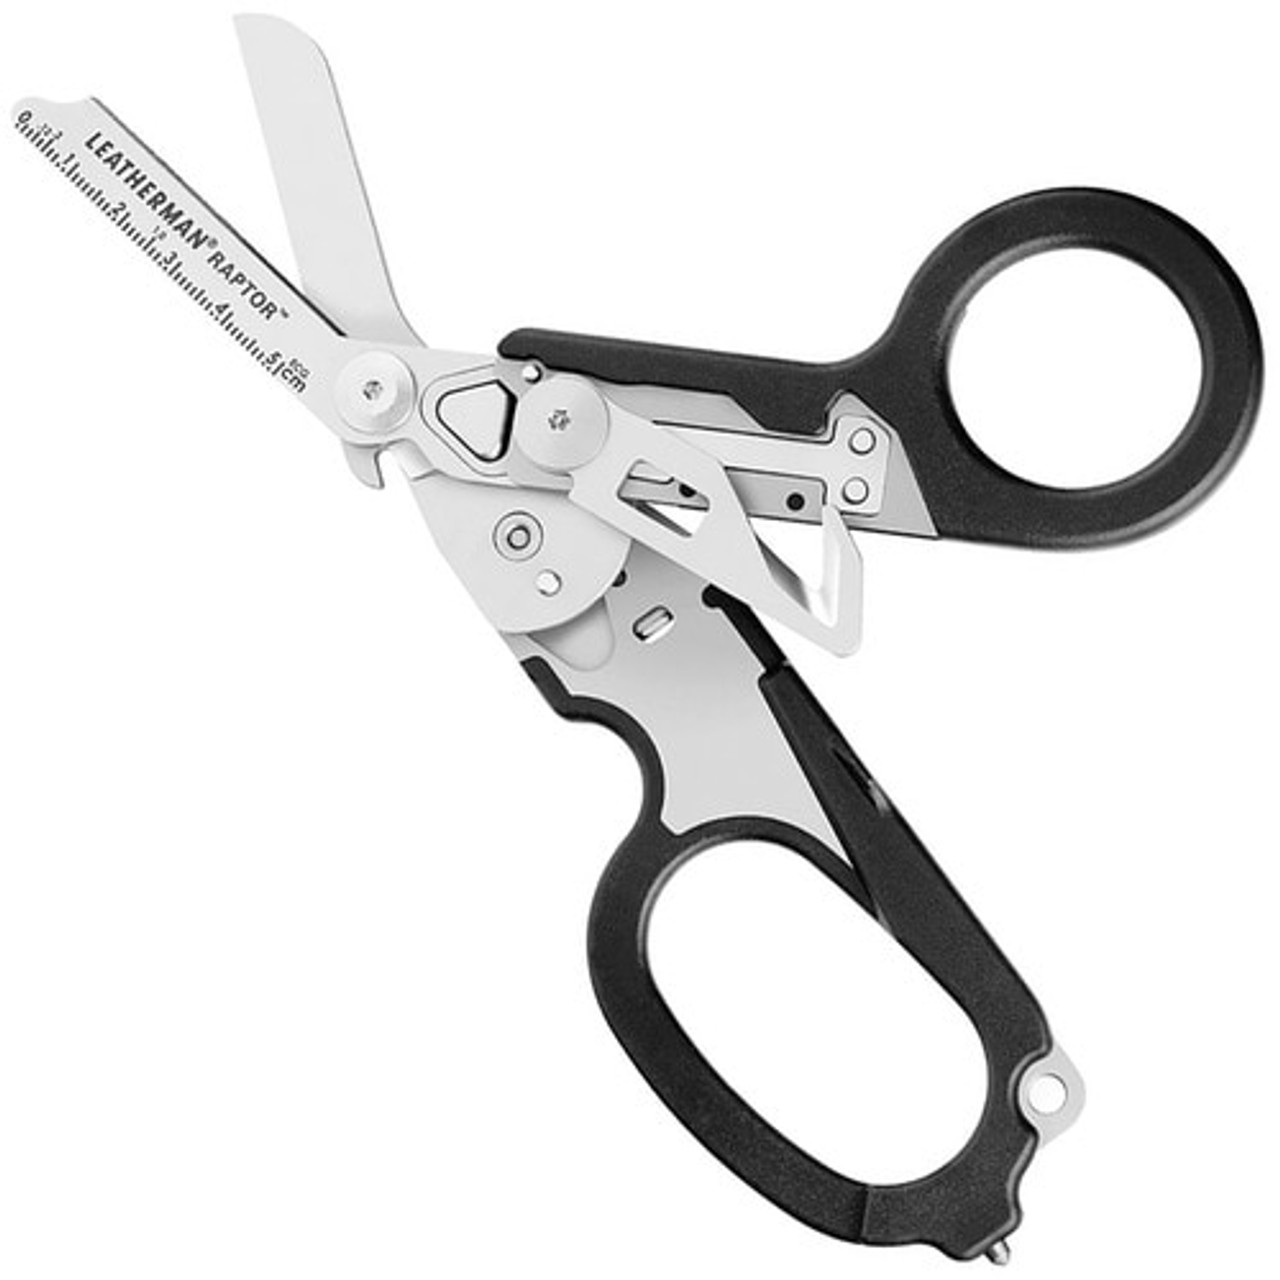 First Aid Only Scissors, Red Handle, 4